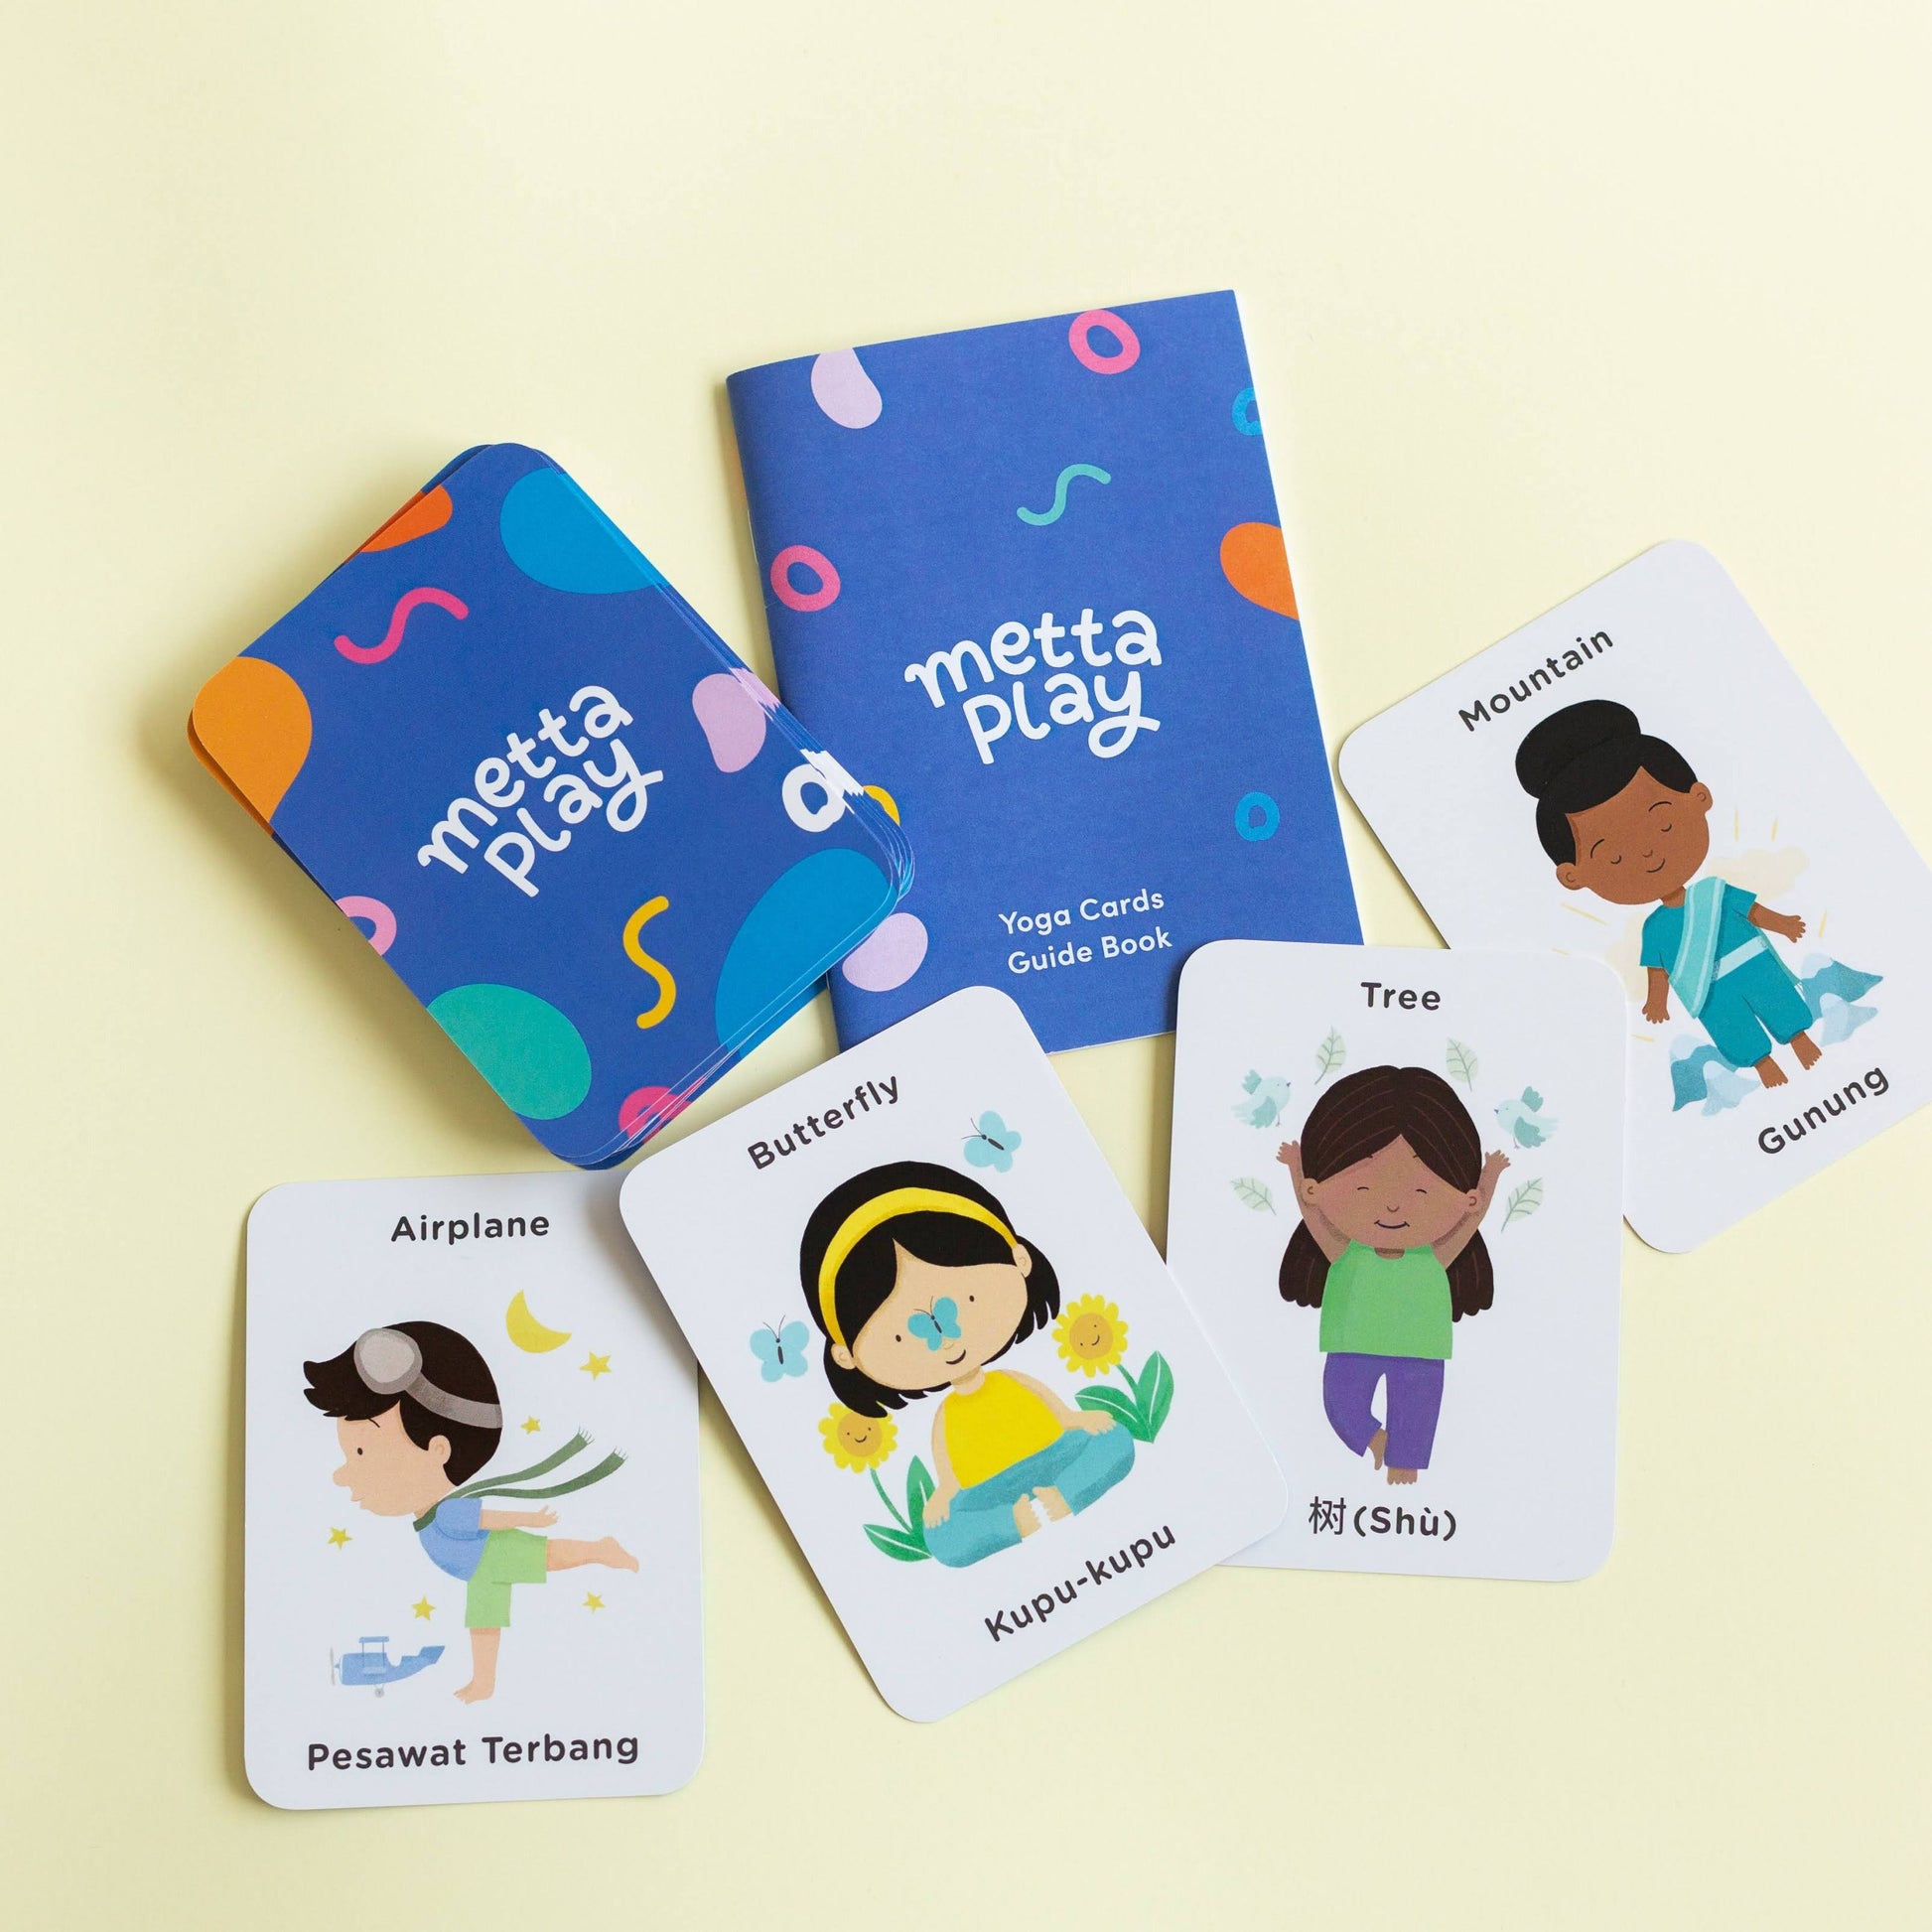 Bilingual Yoga Cards from Metta Play